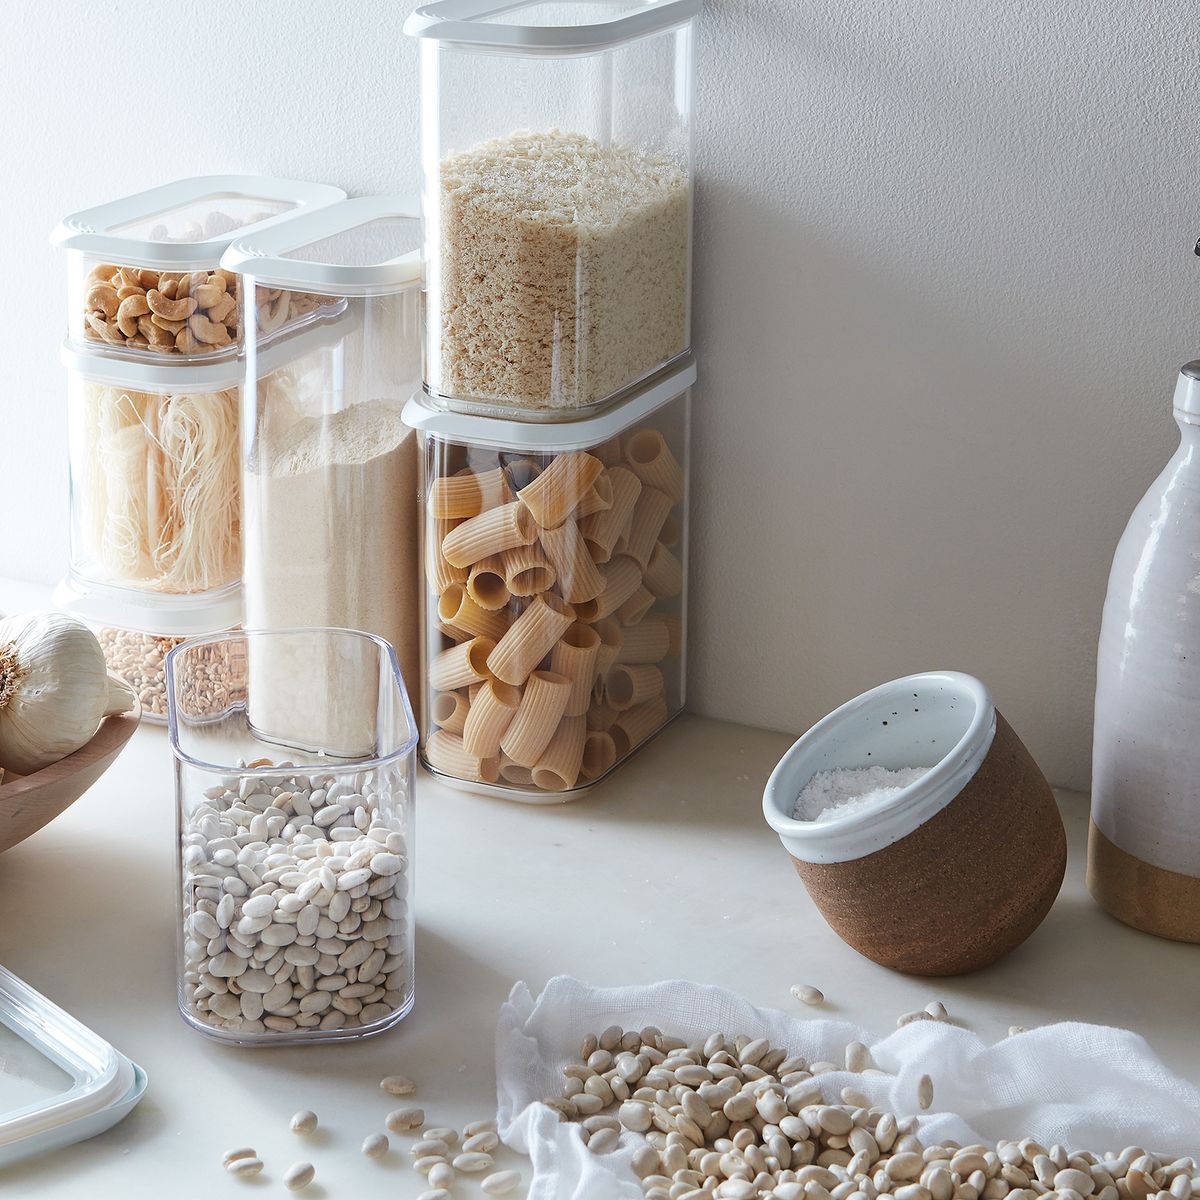 End the Chaos – Organize your Food Storage Containers Today!